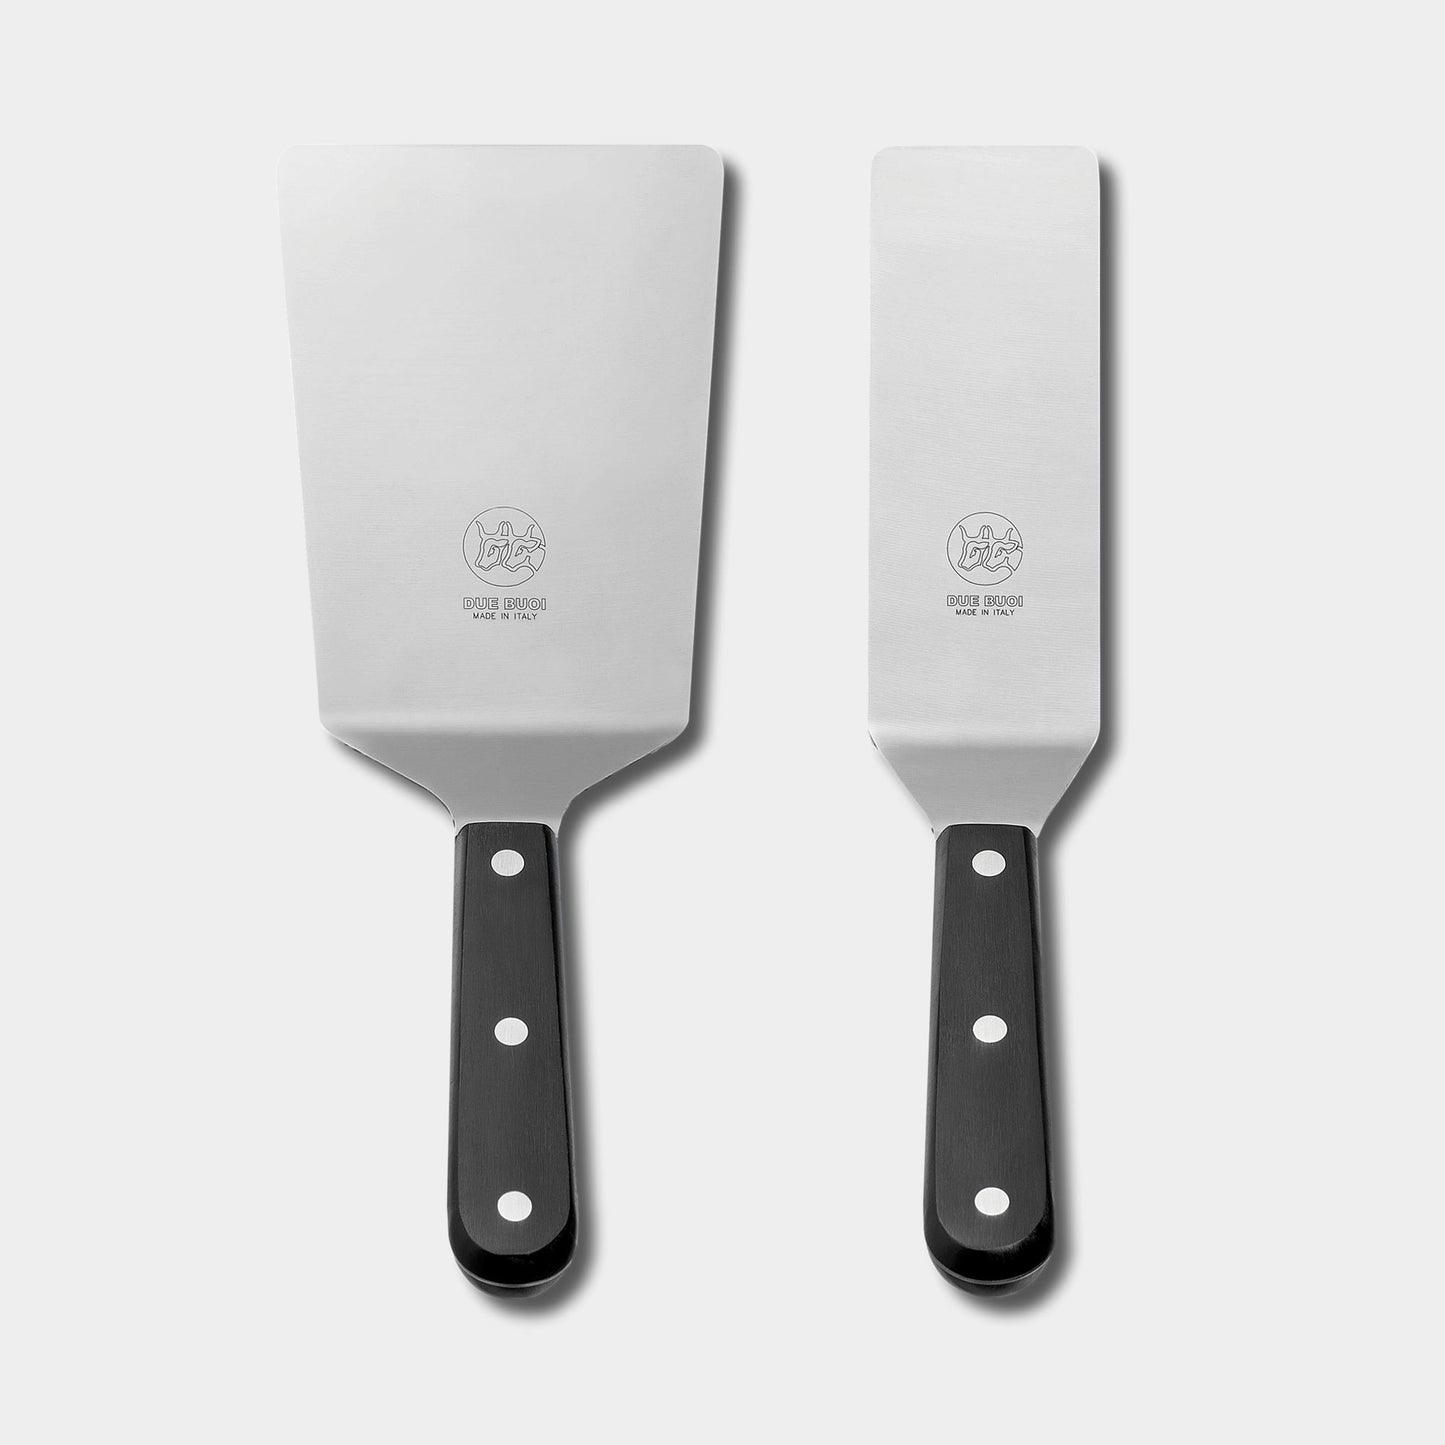 Albion Engineering 922-G01 C A T Spatula Set Stainless Steel Pack of 6